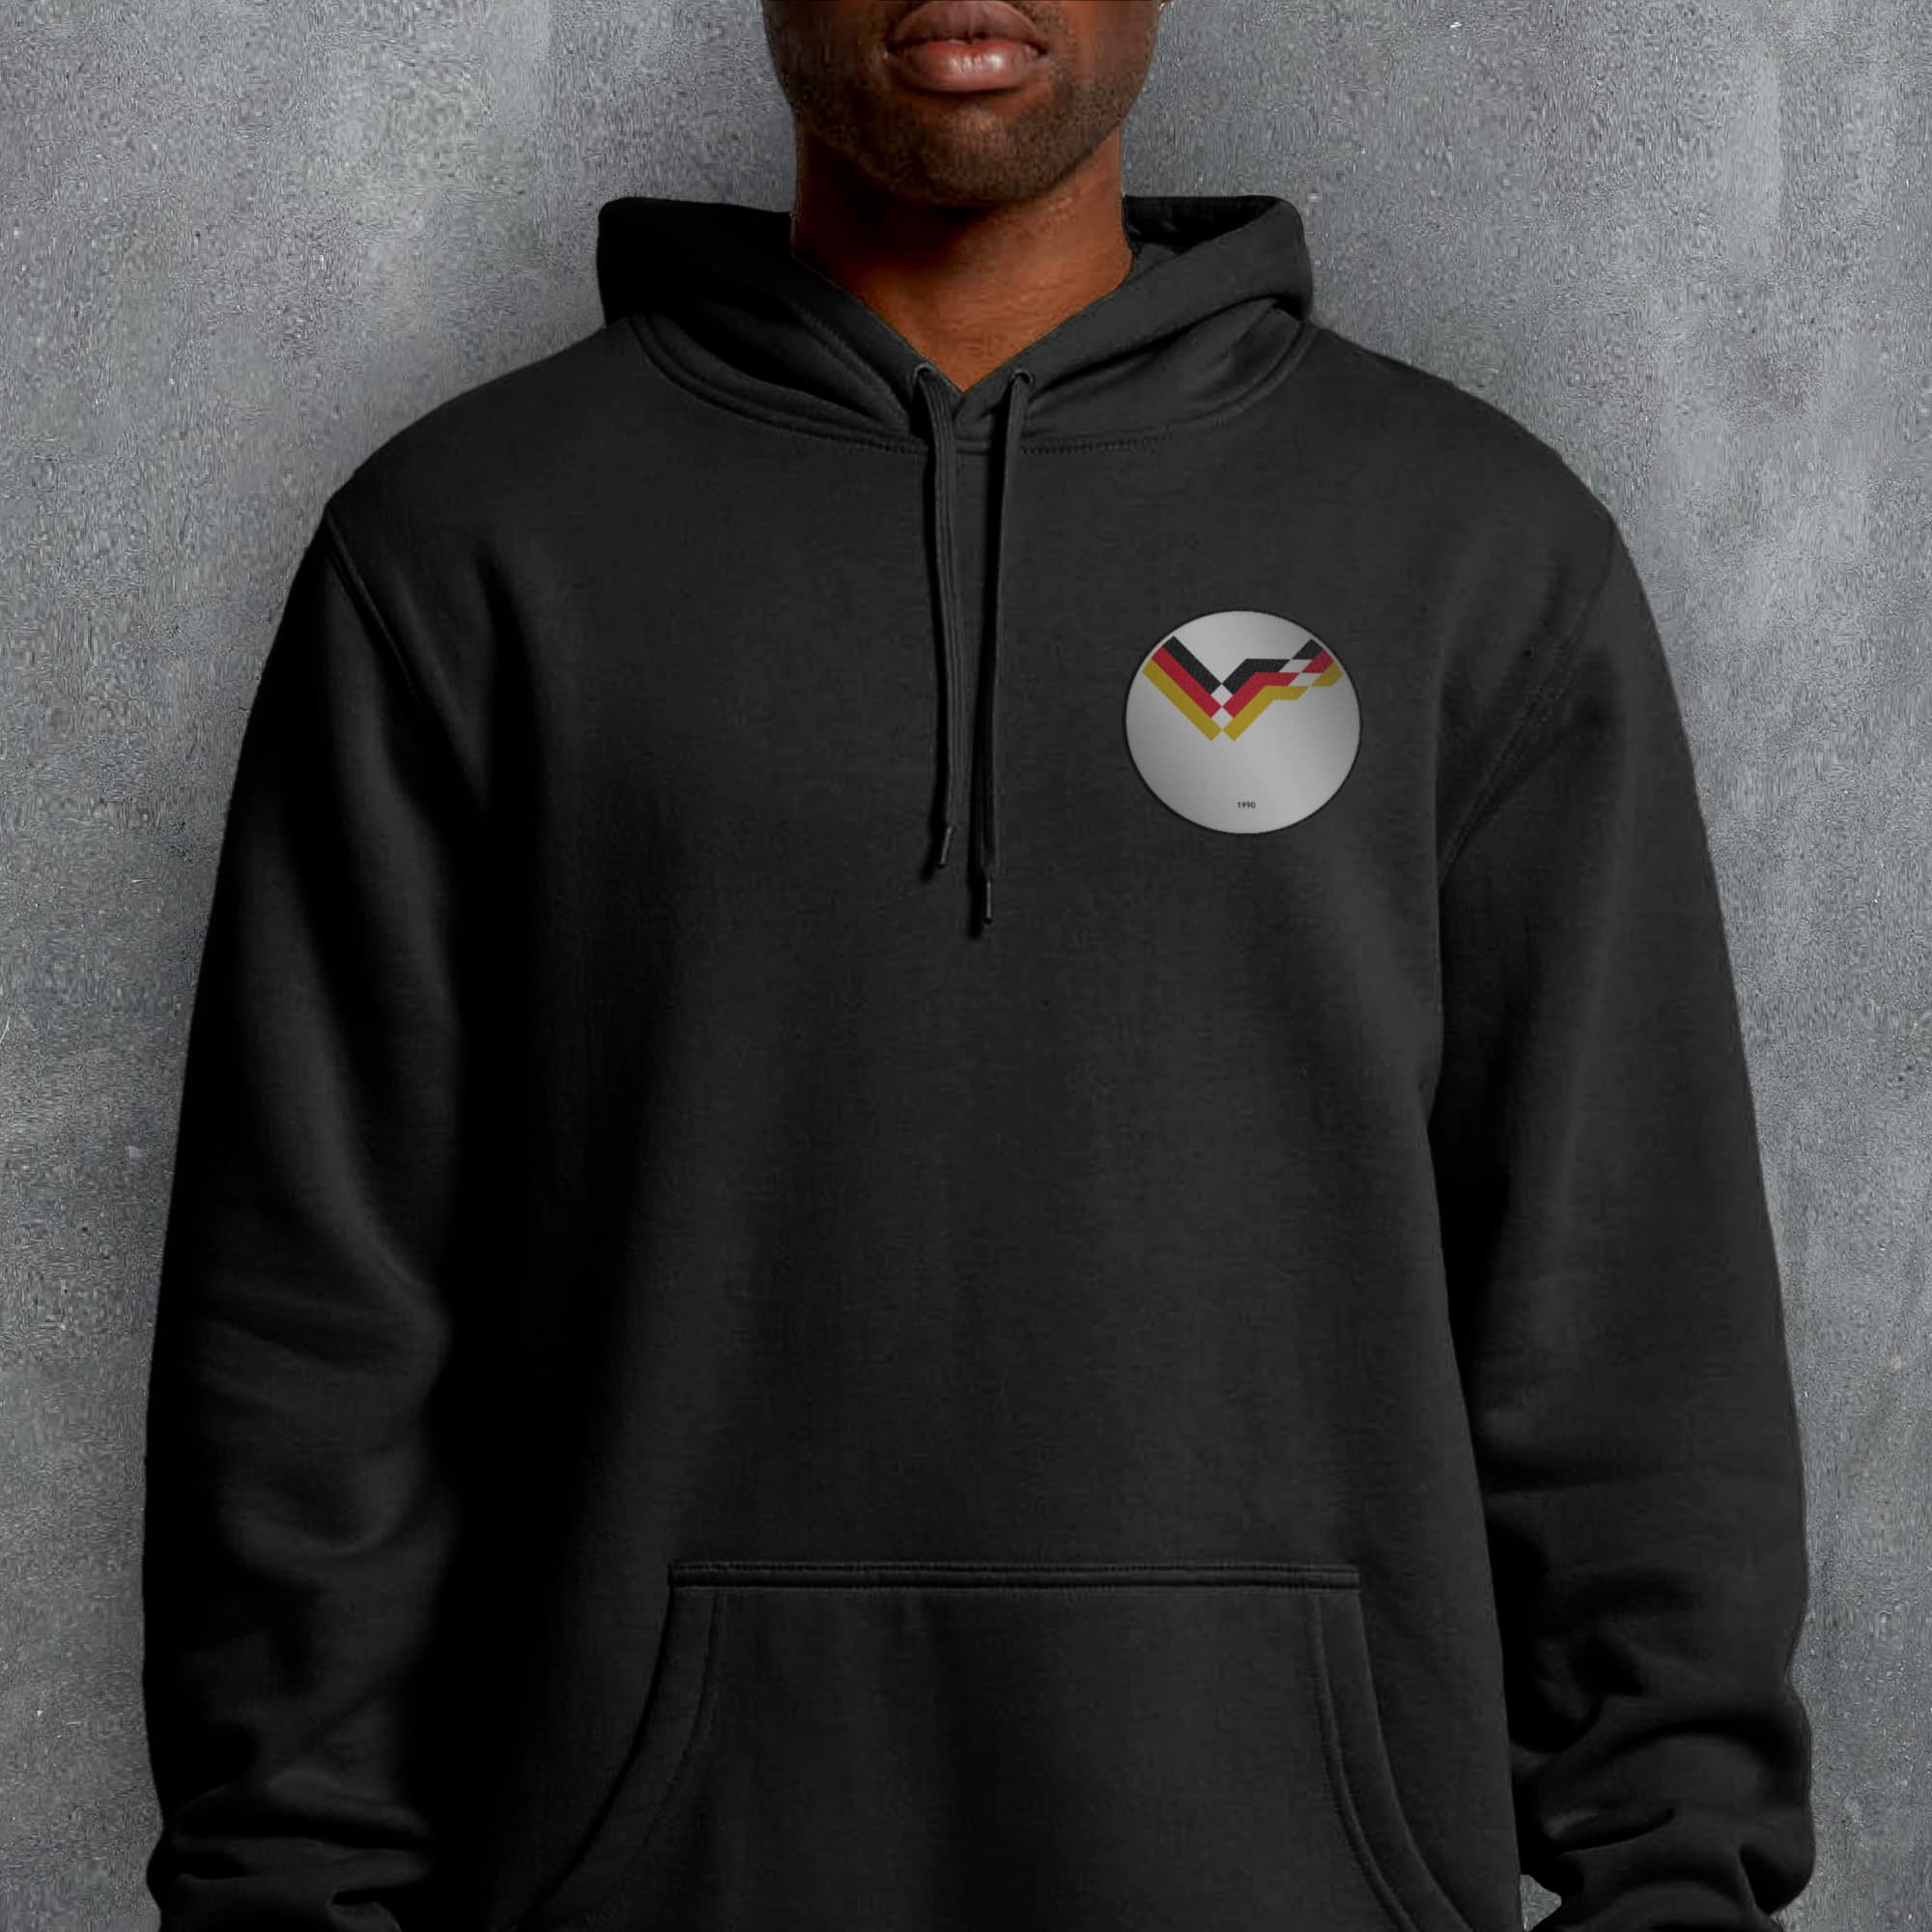 a man wearing a black hoodie with a rainbow logo on it